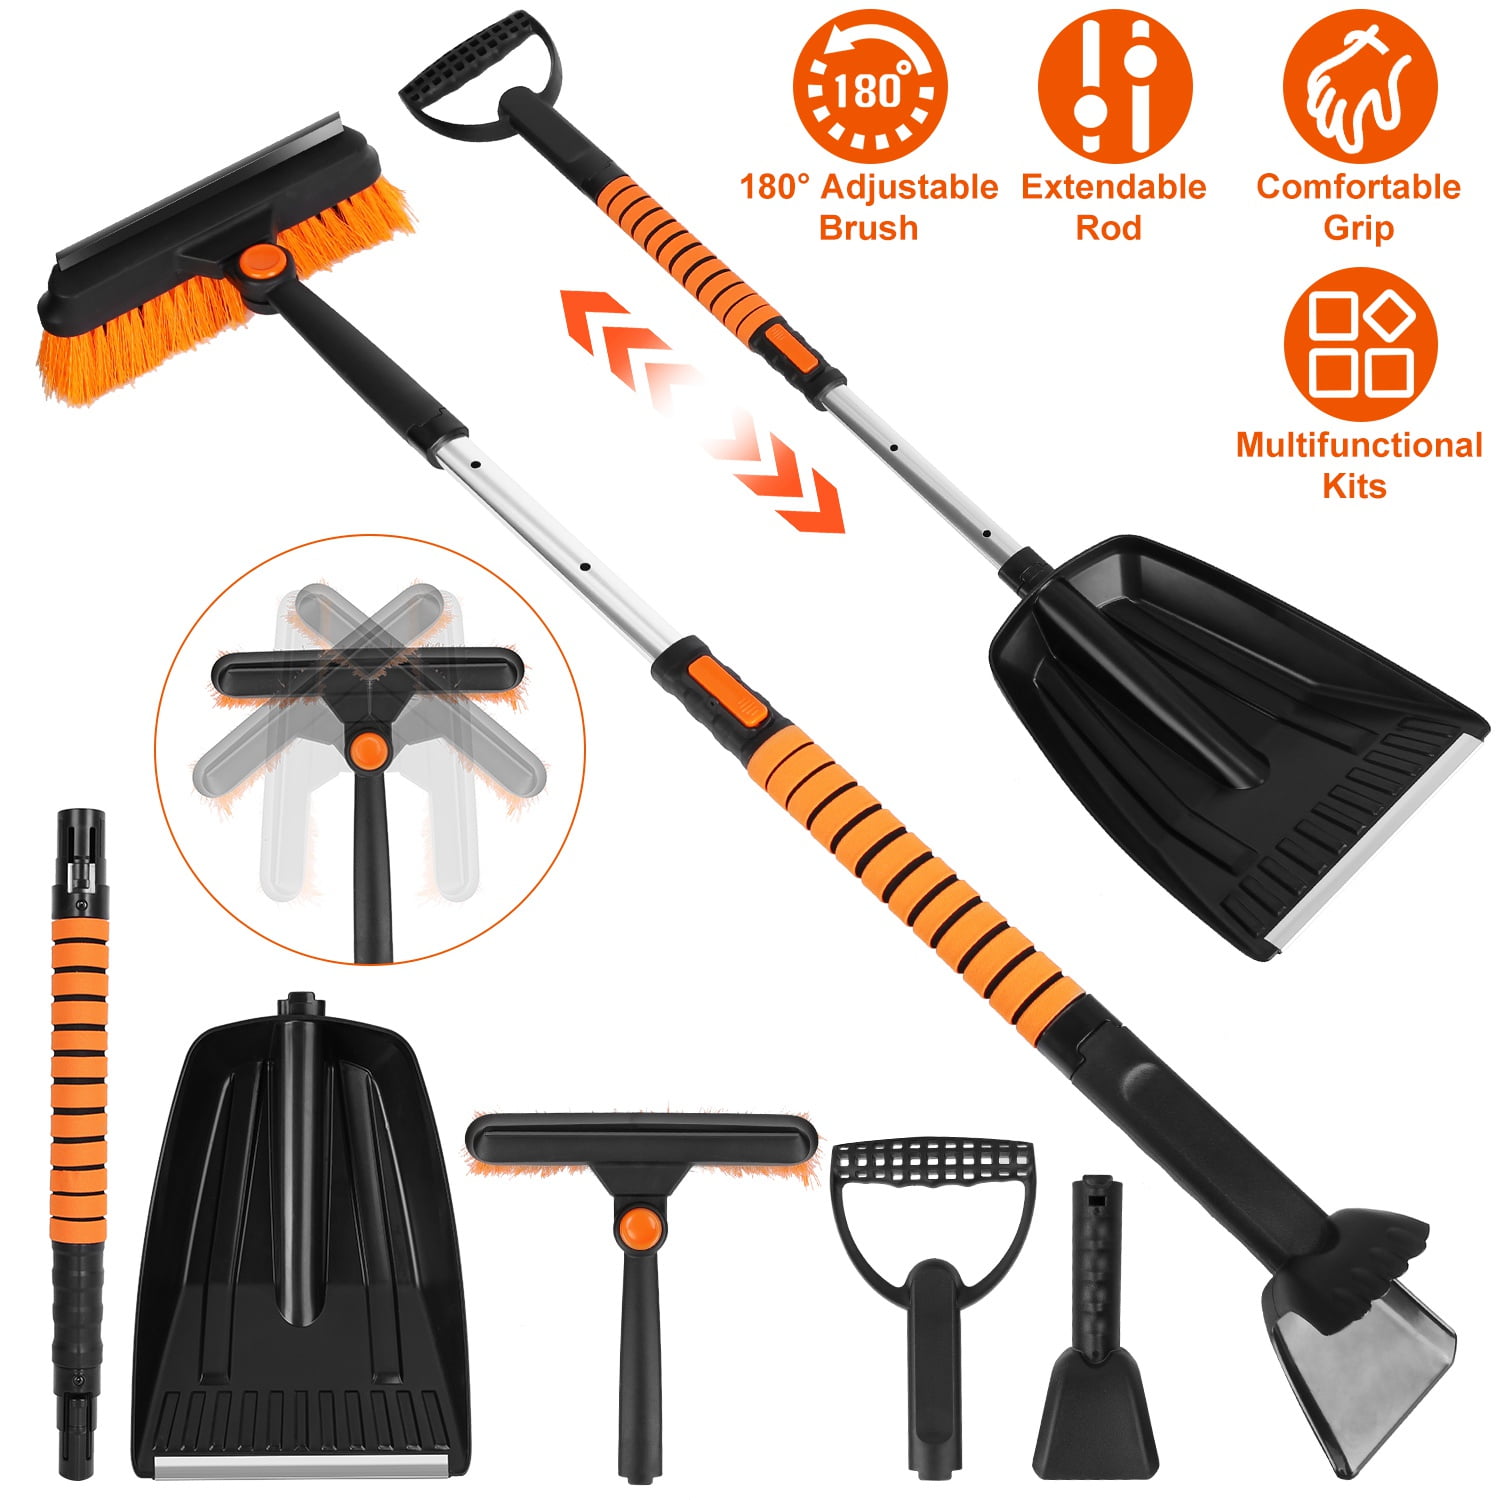 MotoMaster Winter Essentials Automotive Safety Kit with Shovel, Snow Brush,  Ice Scraper and Booster Cables